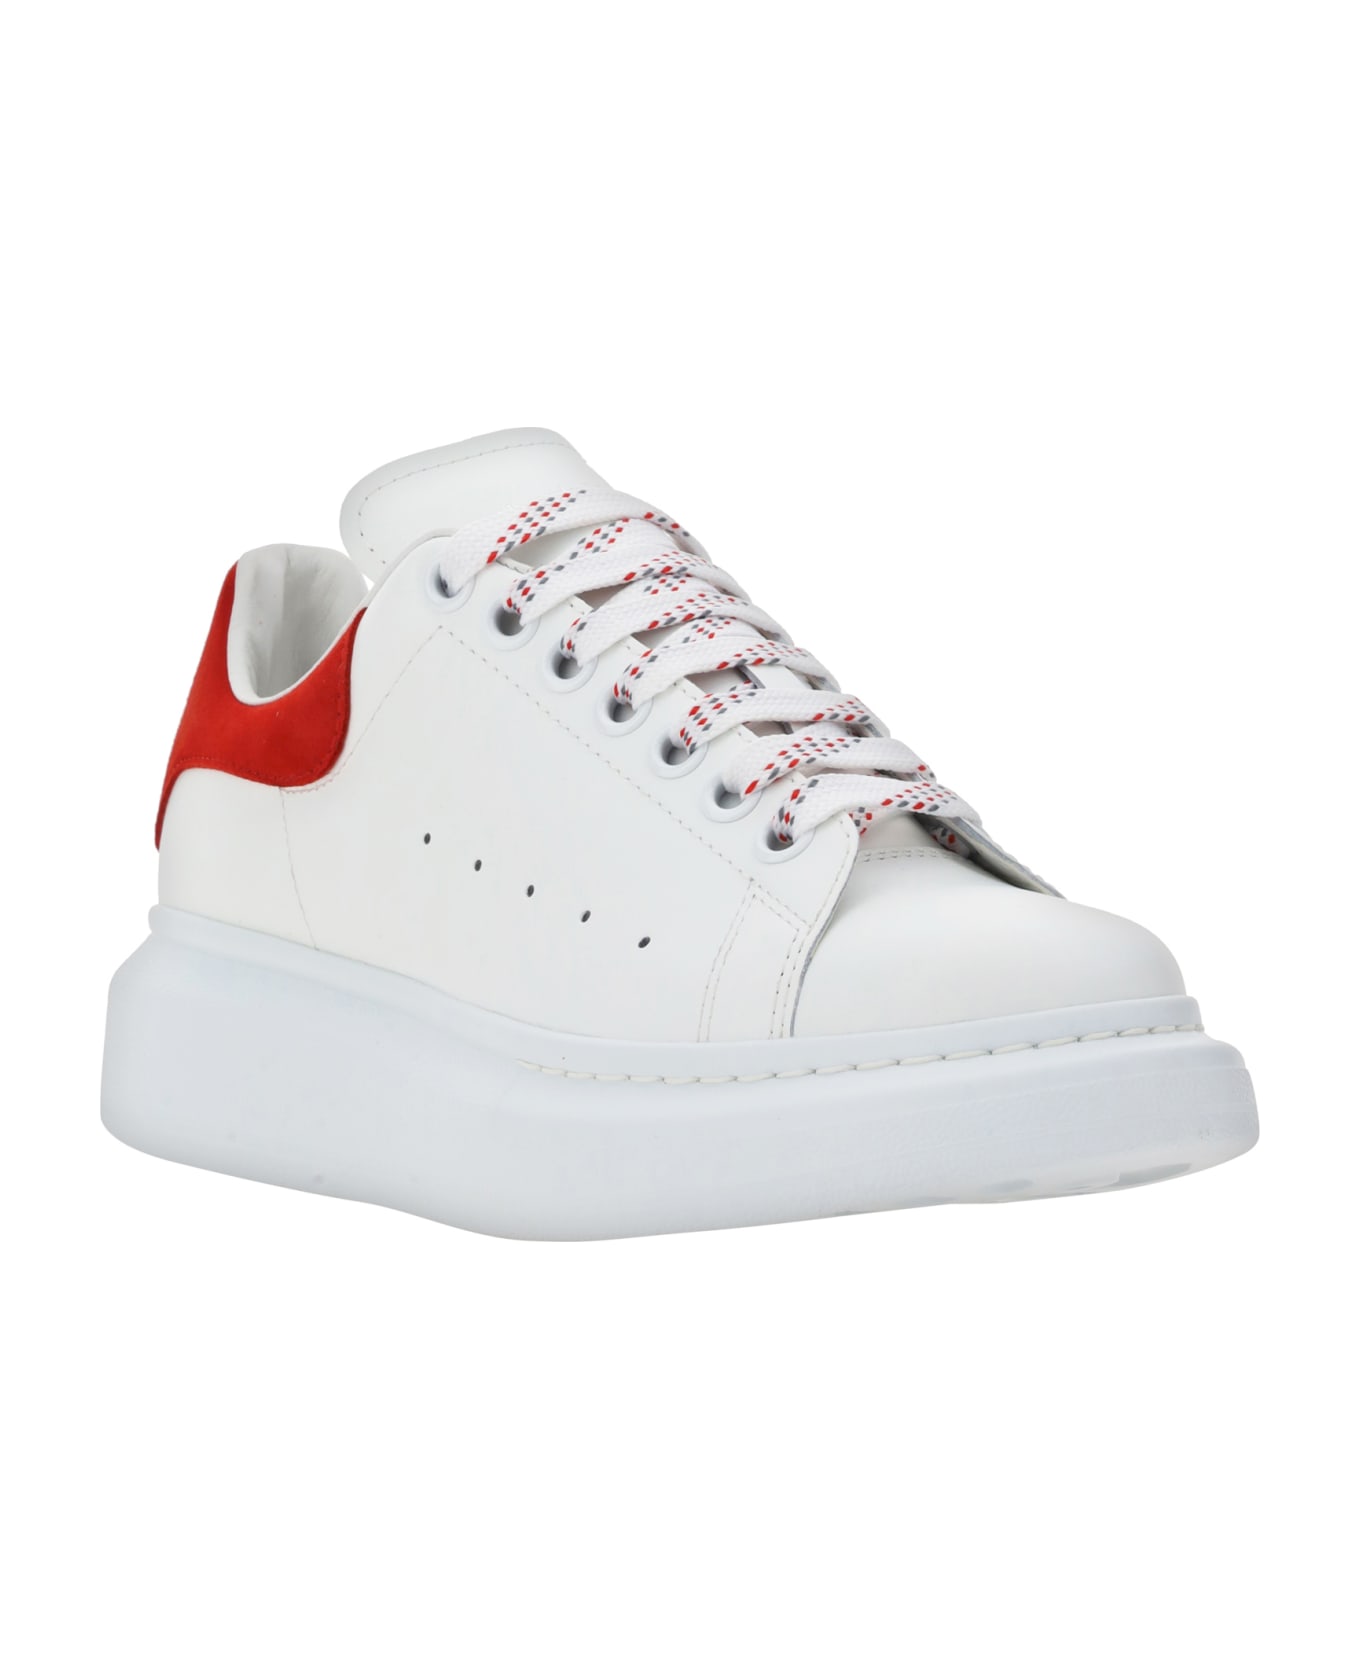 Alexander McQueen Oversized Sneakers In Leather With Contrasting Heel Tab - White Lust Red